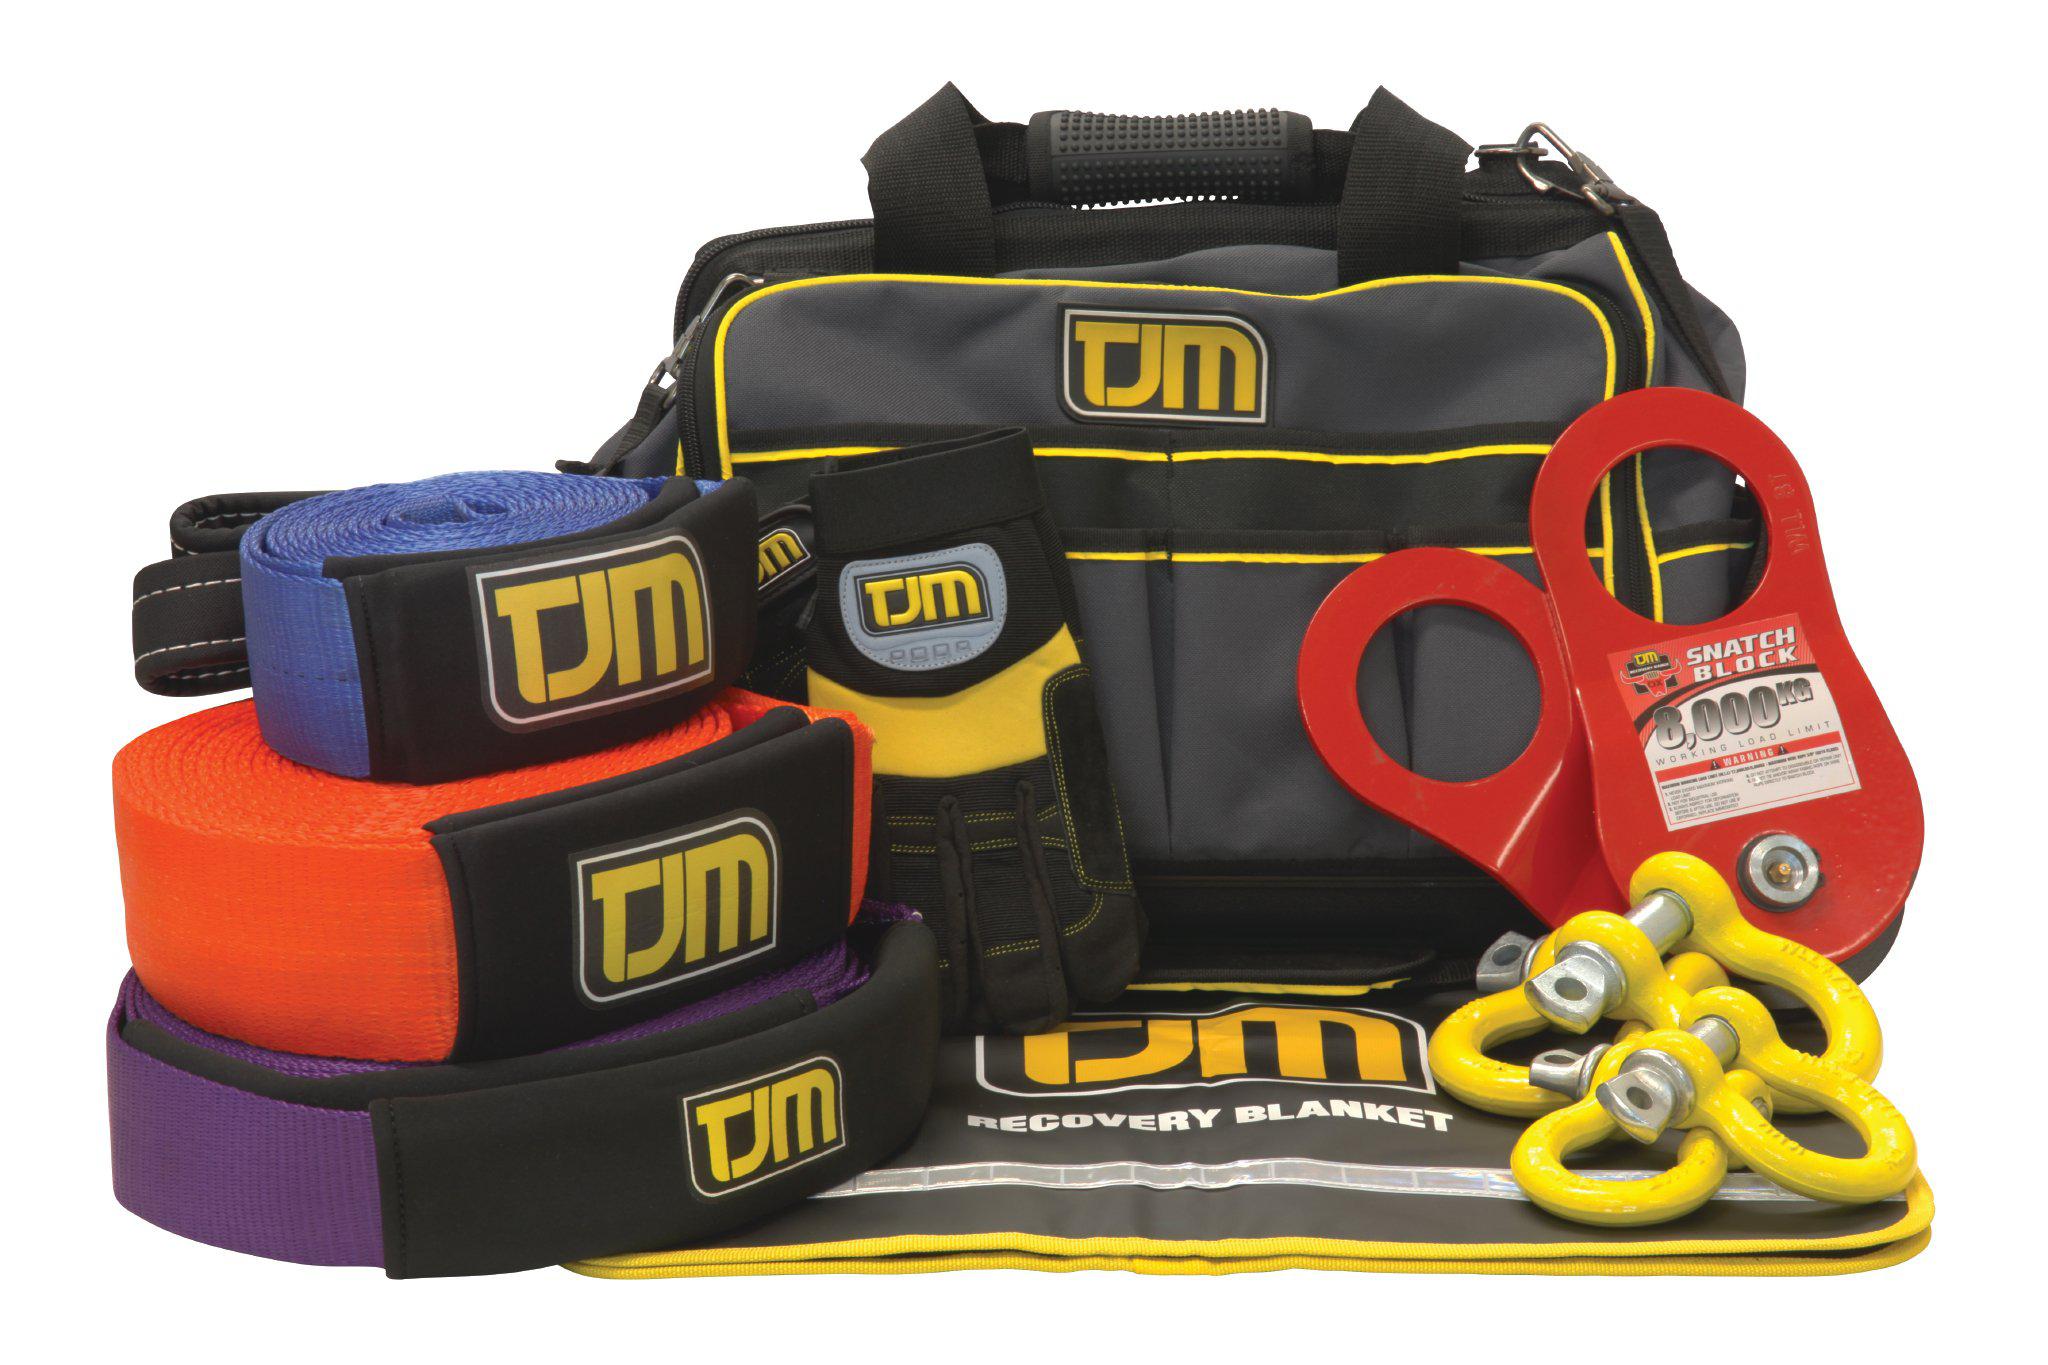 Heavy Duty Recovery Kit - Includes Straps, Bag, Gloves & More - by TJM